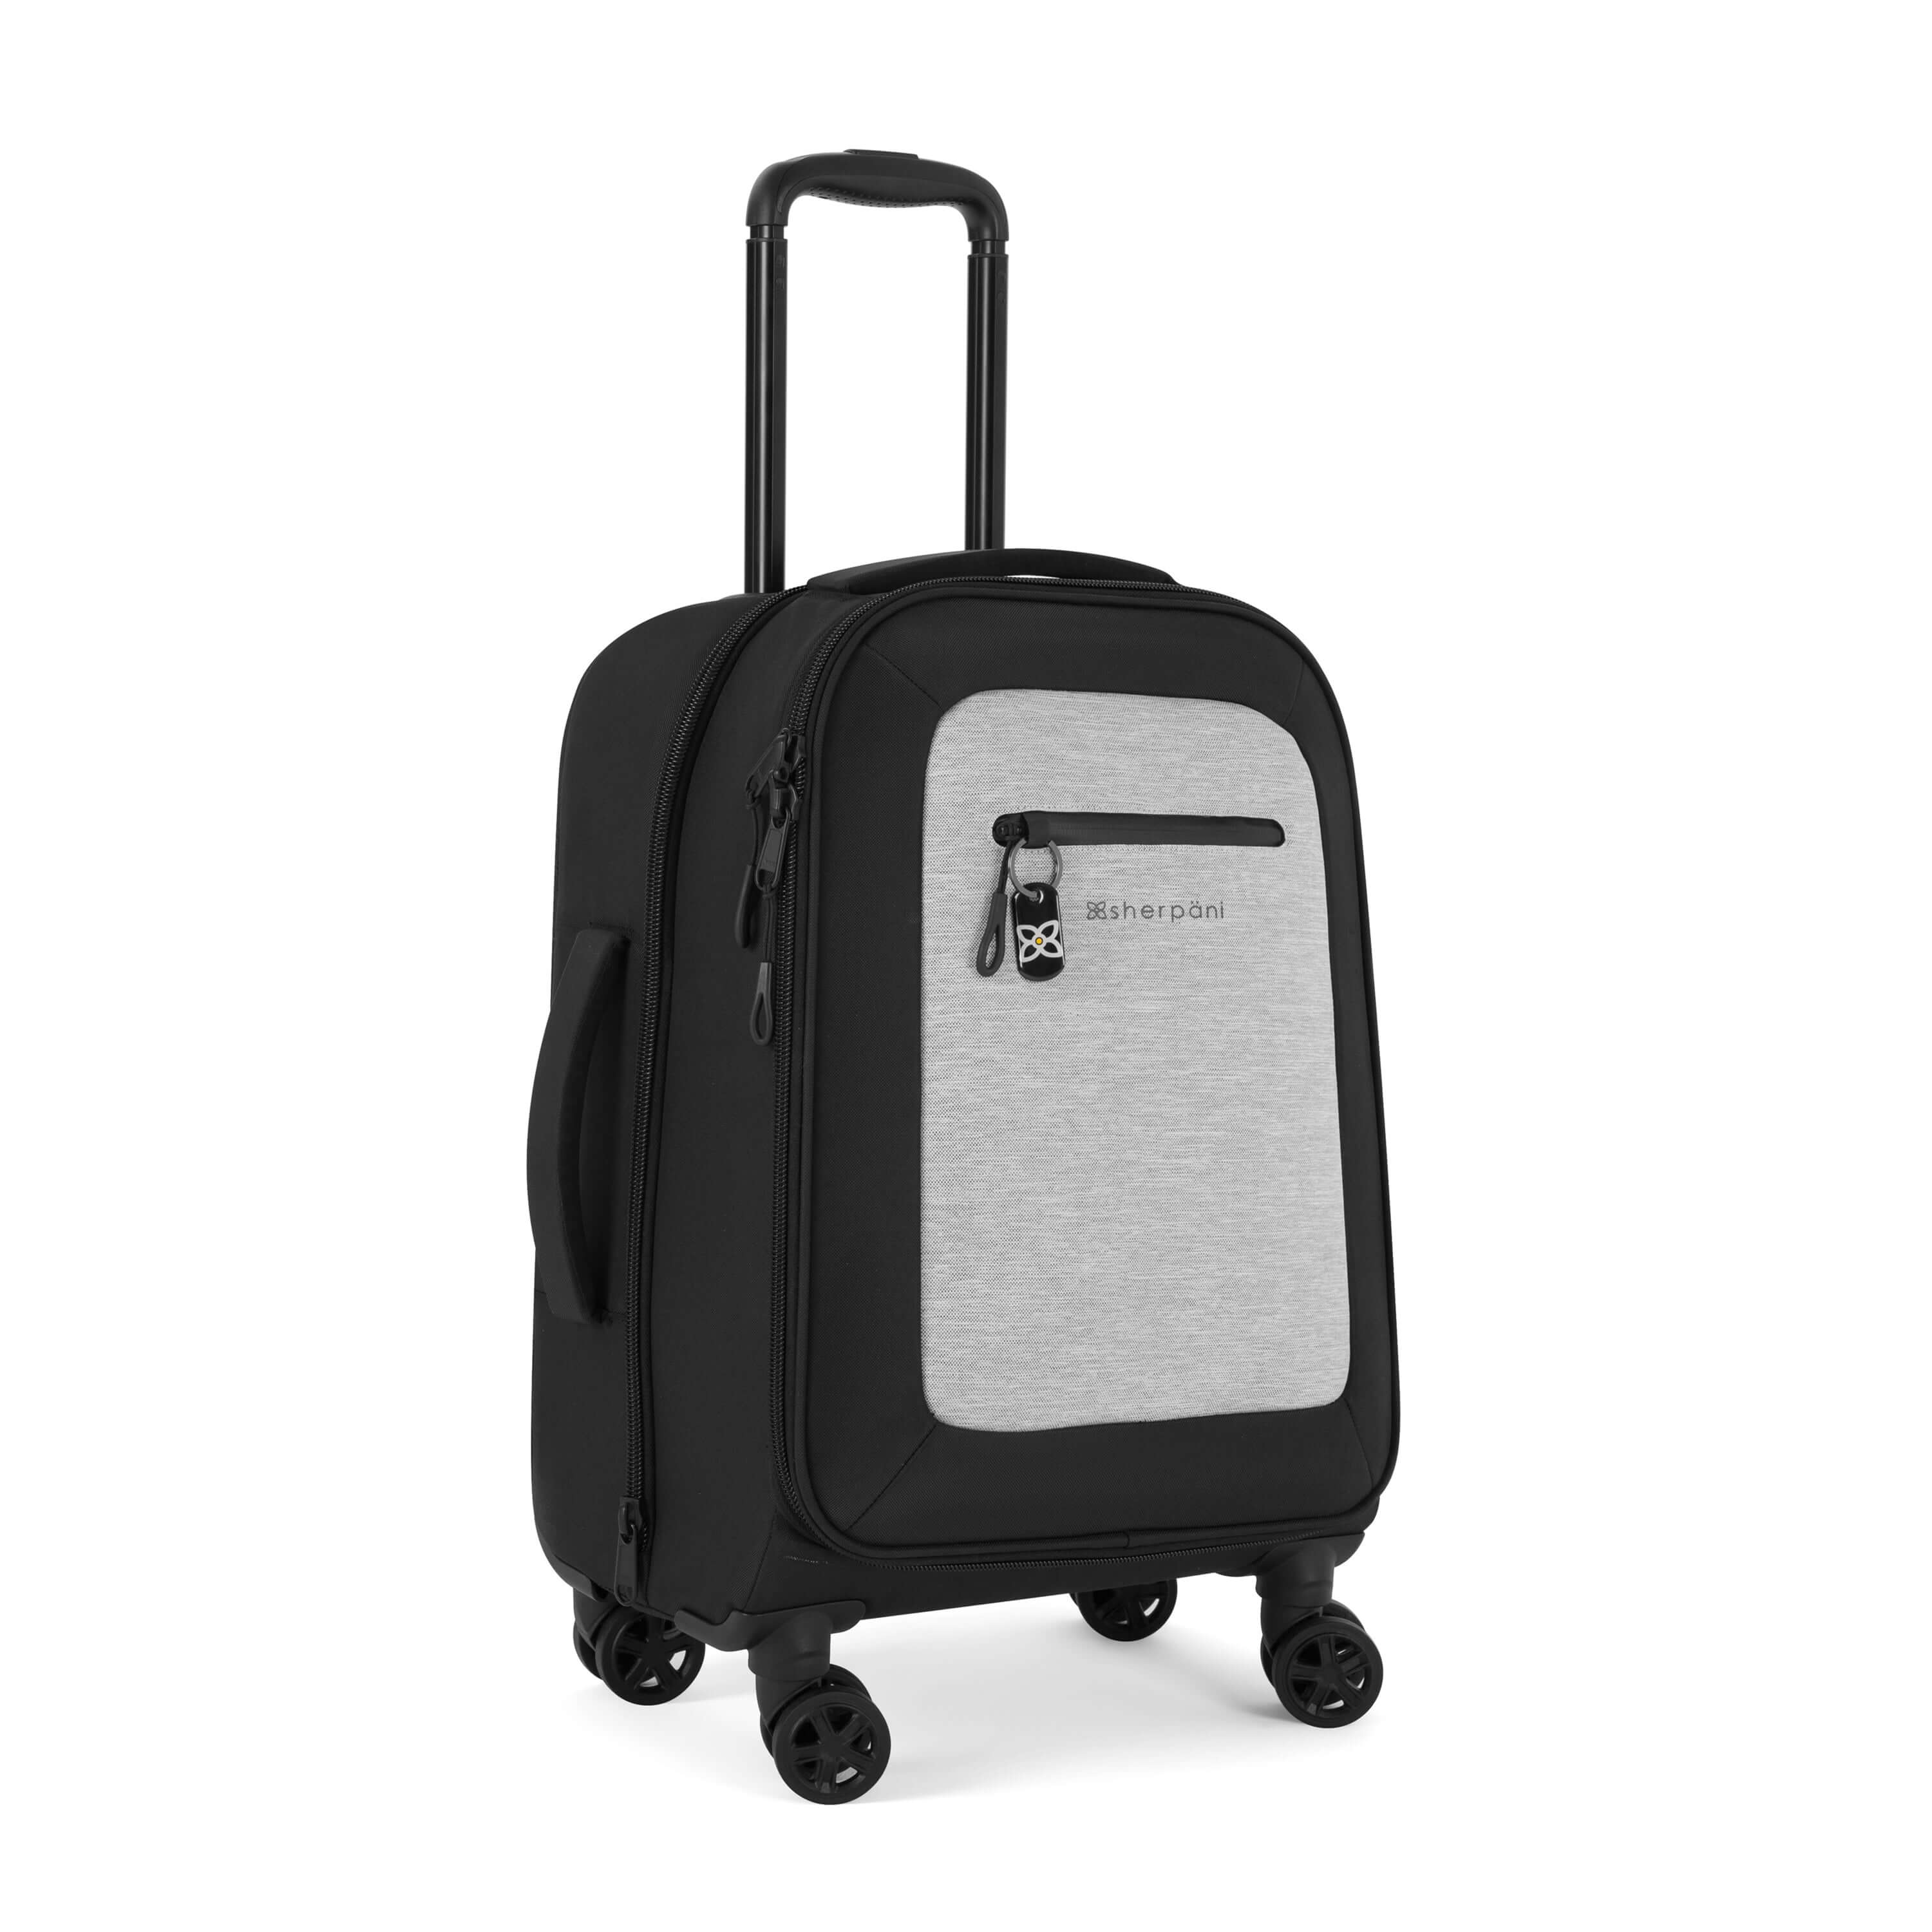 Angled front view of Sherpani's Anti-Theft luggage the Latitude in Sterling. The suitcase has a soft shell exterior made from recycled plastic bottles and features vegan leather accents in black. There is a main zipper compartment, an expansion zipper and an external pocket on the front with a locking zipper and a ReturnMe tag. On the top of the suitcase sits a retractable luggage handle. On the side sits an easy-access handle. At the bottom are four 360-degree spinner wheels for rolling. #color_sterling